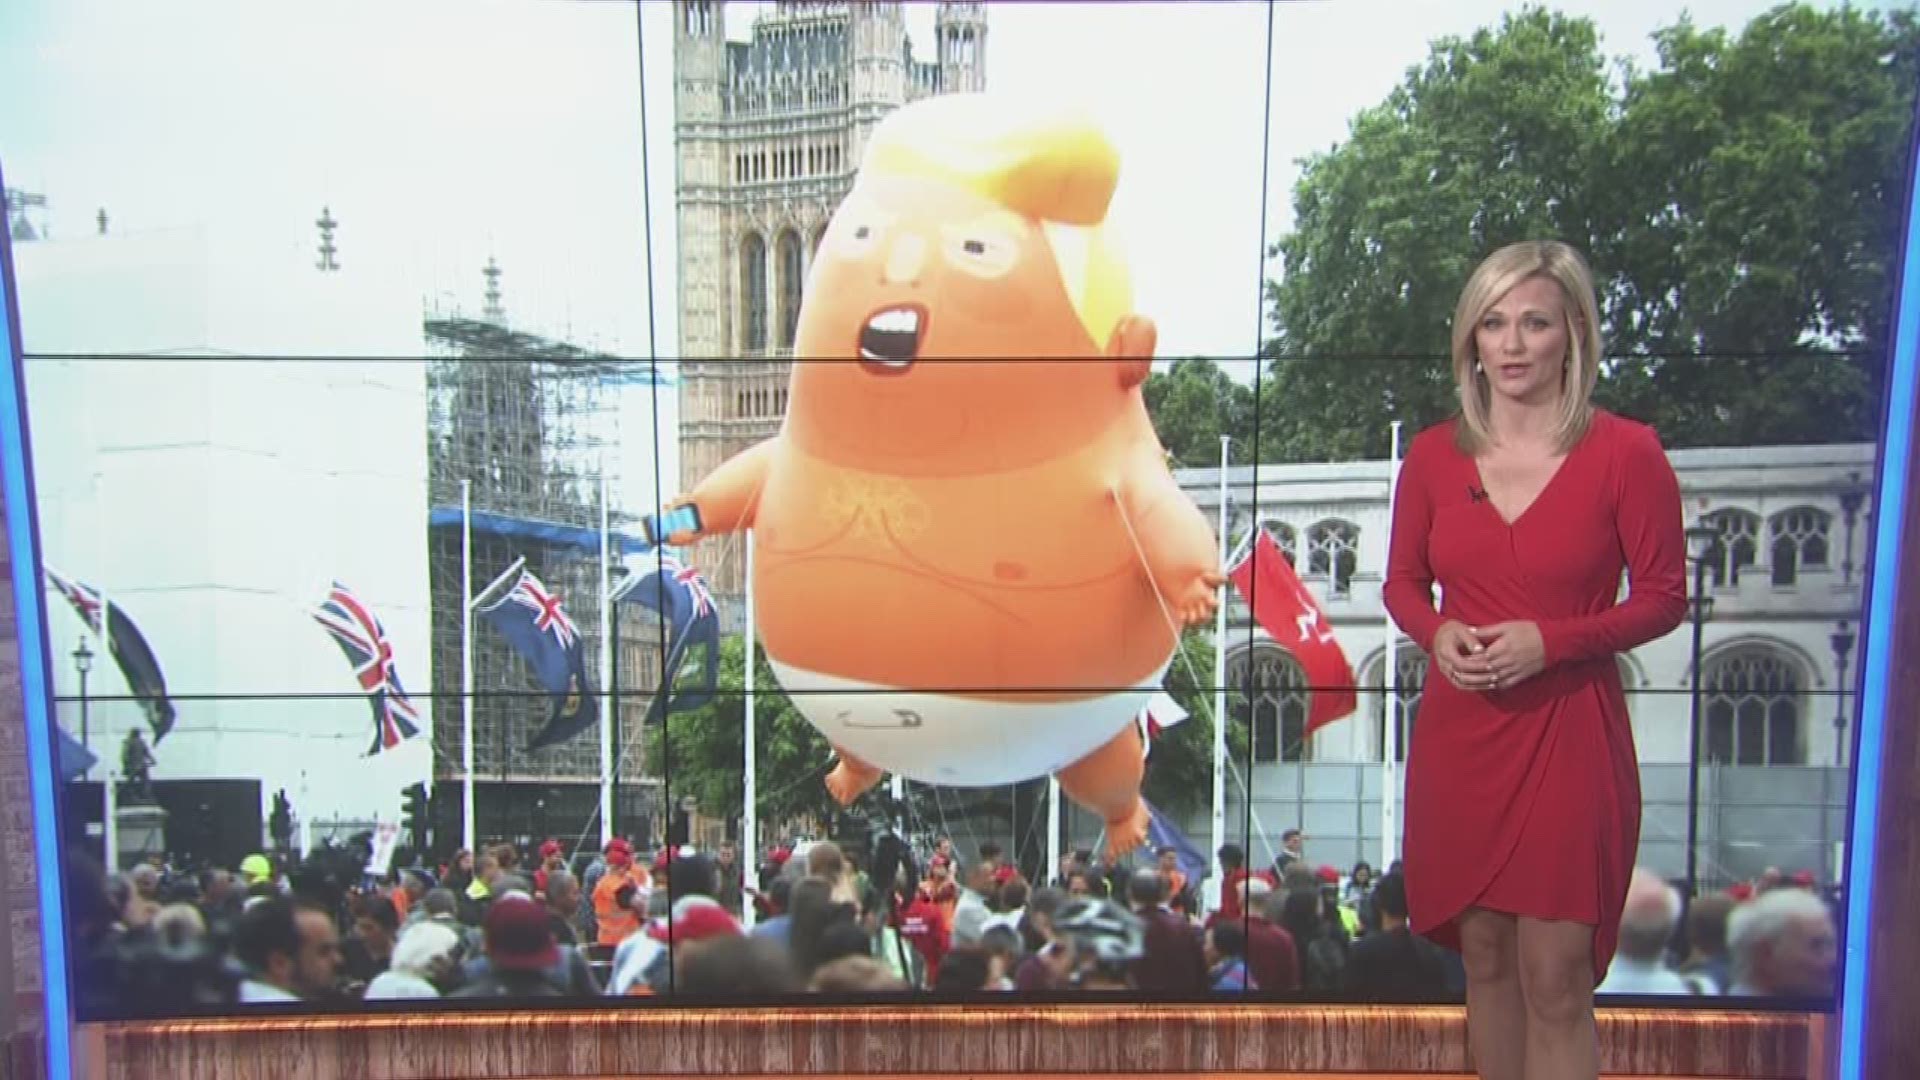 The balloon with a Trump-like resemblance in a diaper is set to come to Orlando in time for the president's expected reelection announcement Tuesday, CBS affiliate WKMG reports.

Roughly $3,900 was crowdsourced on GoFundMe to make the transportation of the balloon possible. The balloon is expected to be hosted from 5 p.m. to 7 p.m. at a 'Win with Love Rally' near Stonewall Bar on Church Street. The rally will be held in opposition to Trump's reelection rally at the Amway Center.